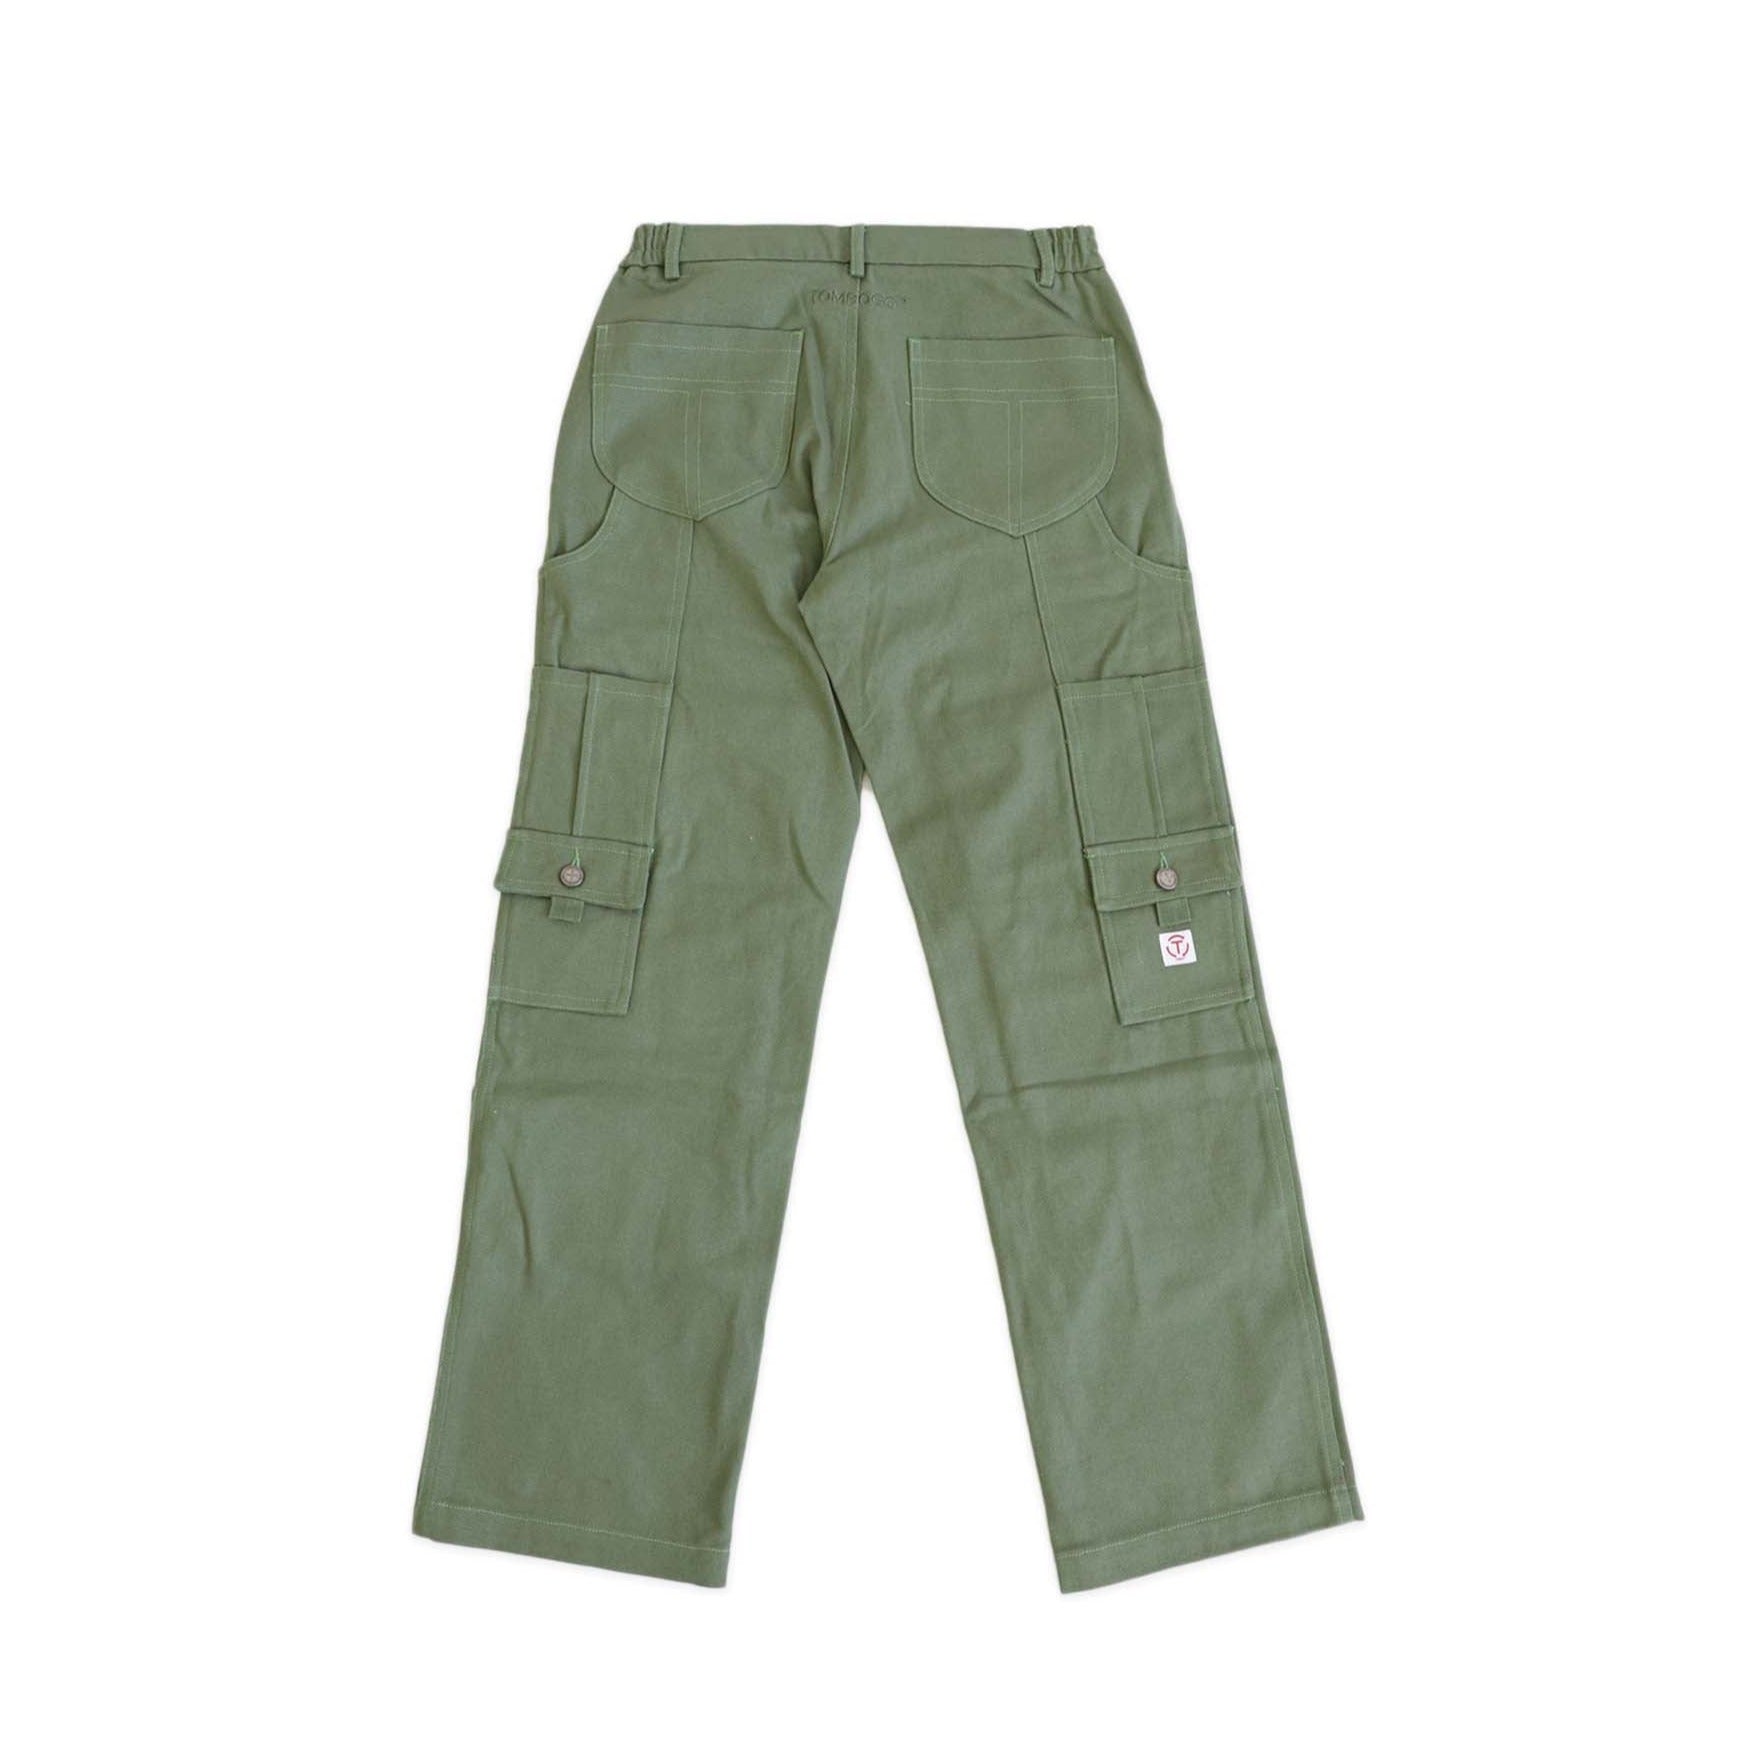 Jane Motorcycles Bedford Canvas Double Knee Pant - Natural